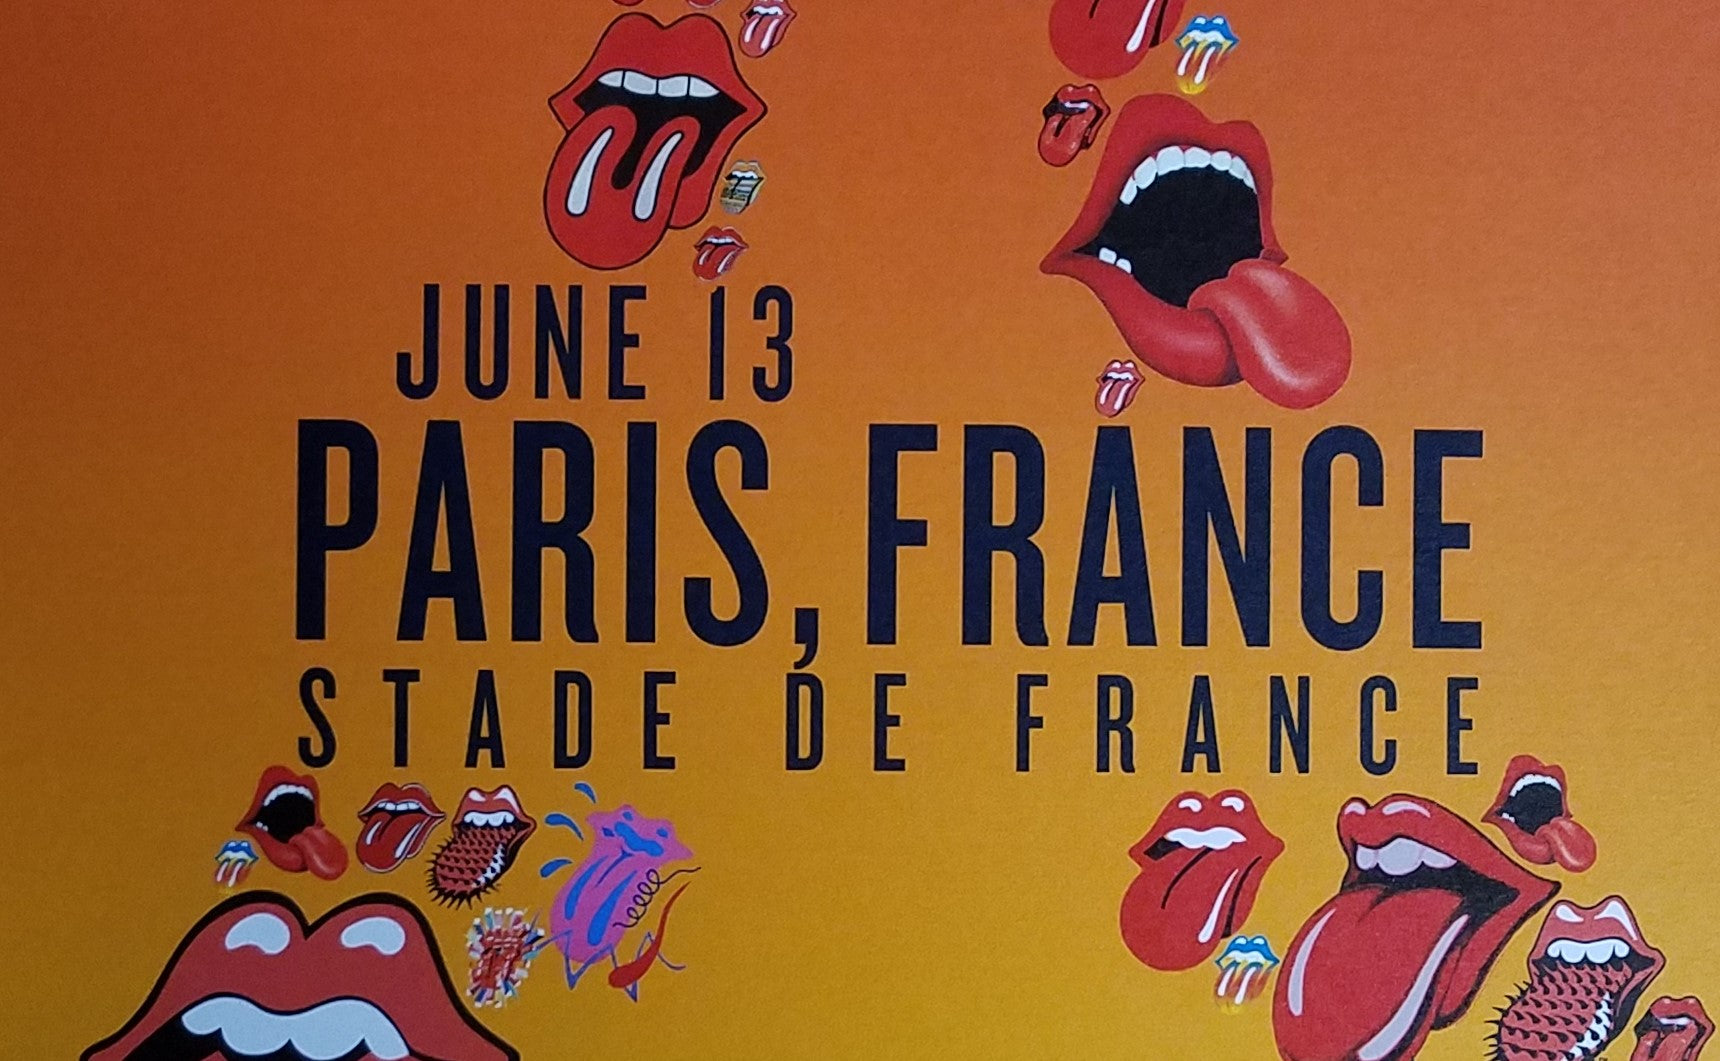 Title:  Rolling Stones - 2014 OFFICIAL POSTER PARIS FRANCE  Poster artist:   Edition:  xx/500  Type:  Limited edition lithograph   Size:  17" x 23"  Location: Paris, France   Venue: Stade De France   Notes:  1st edition, official poster hand numbered and embossed.  Official poster, Europe 14 On Fire Tour original from the show!